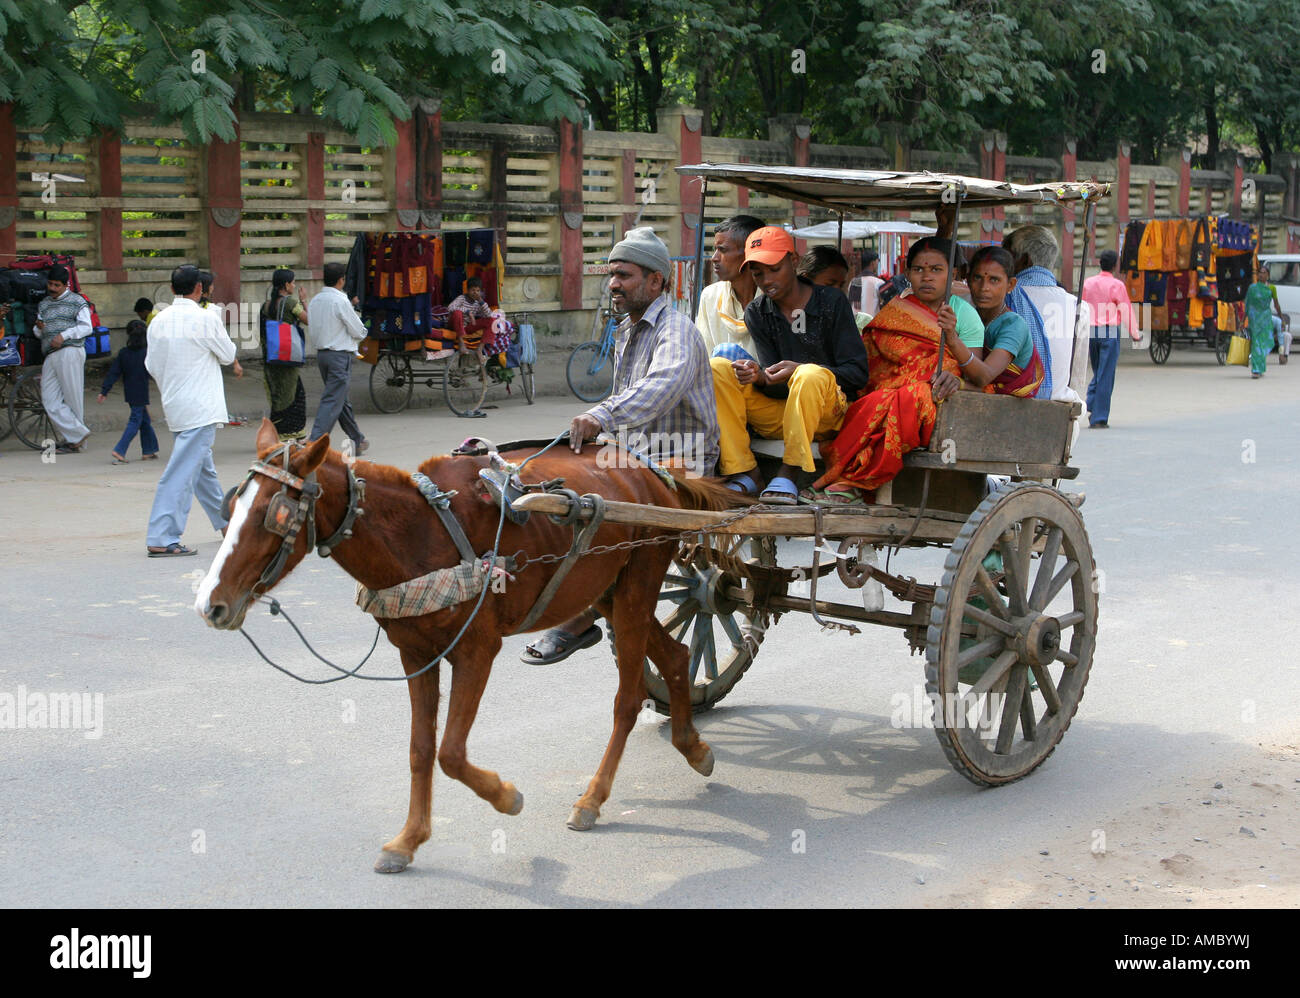 India, Bodhgaya: Horse-drawn carriage in the streets of the buddhist holy site of Bodhgaya Stock Photo